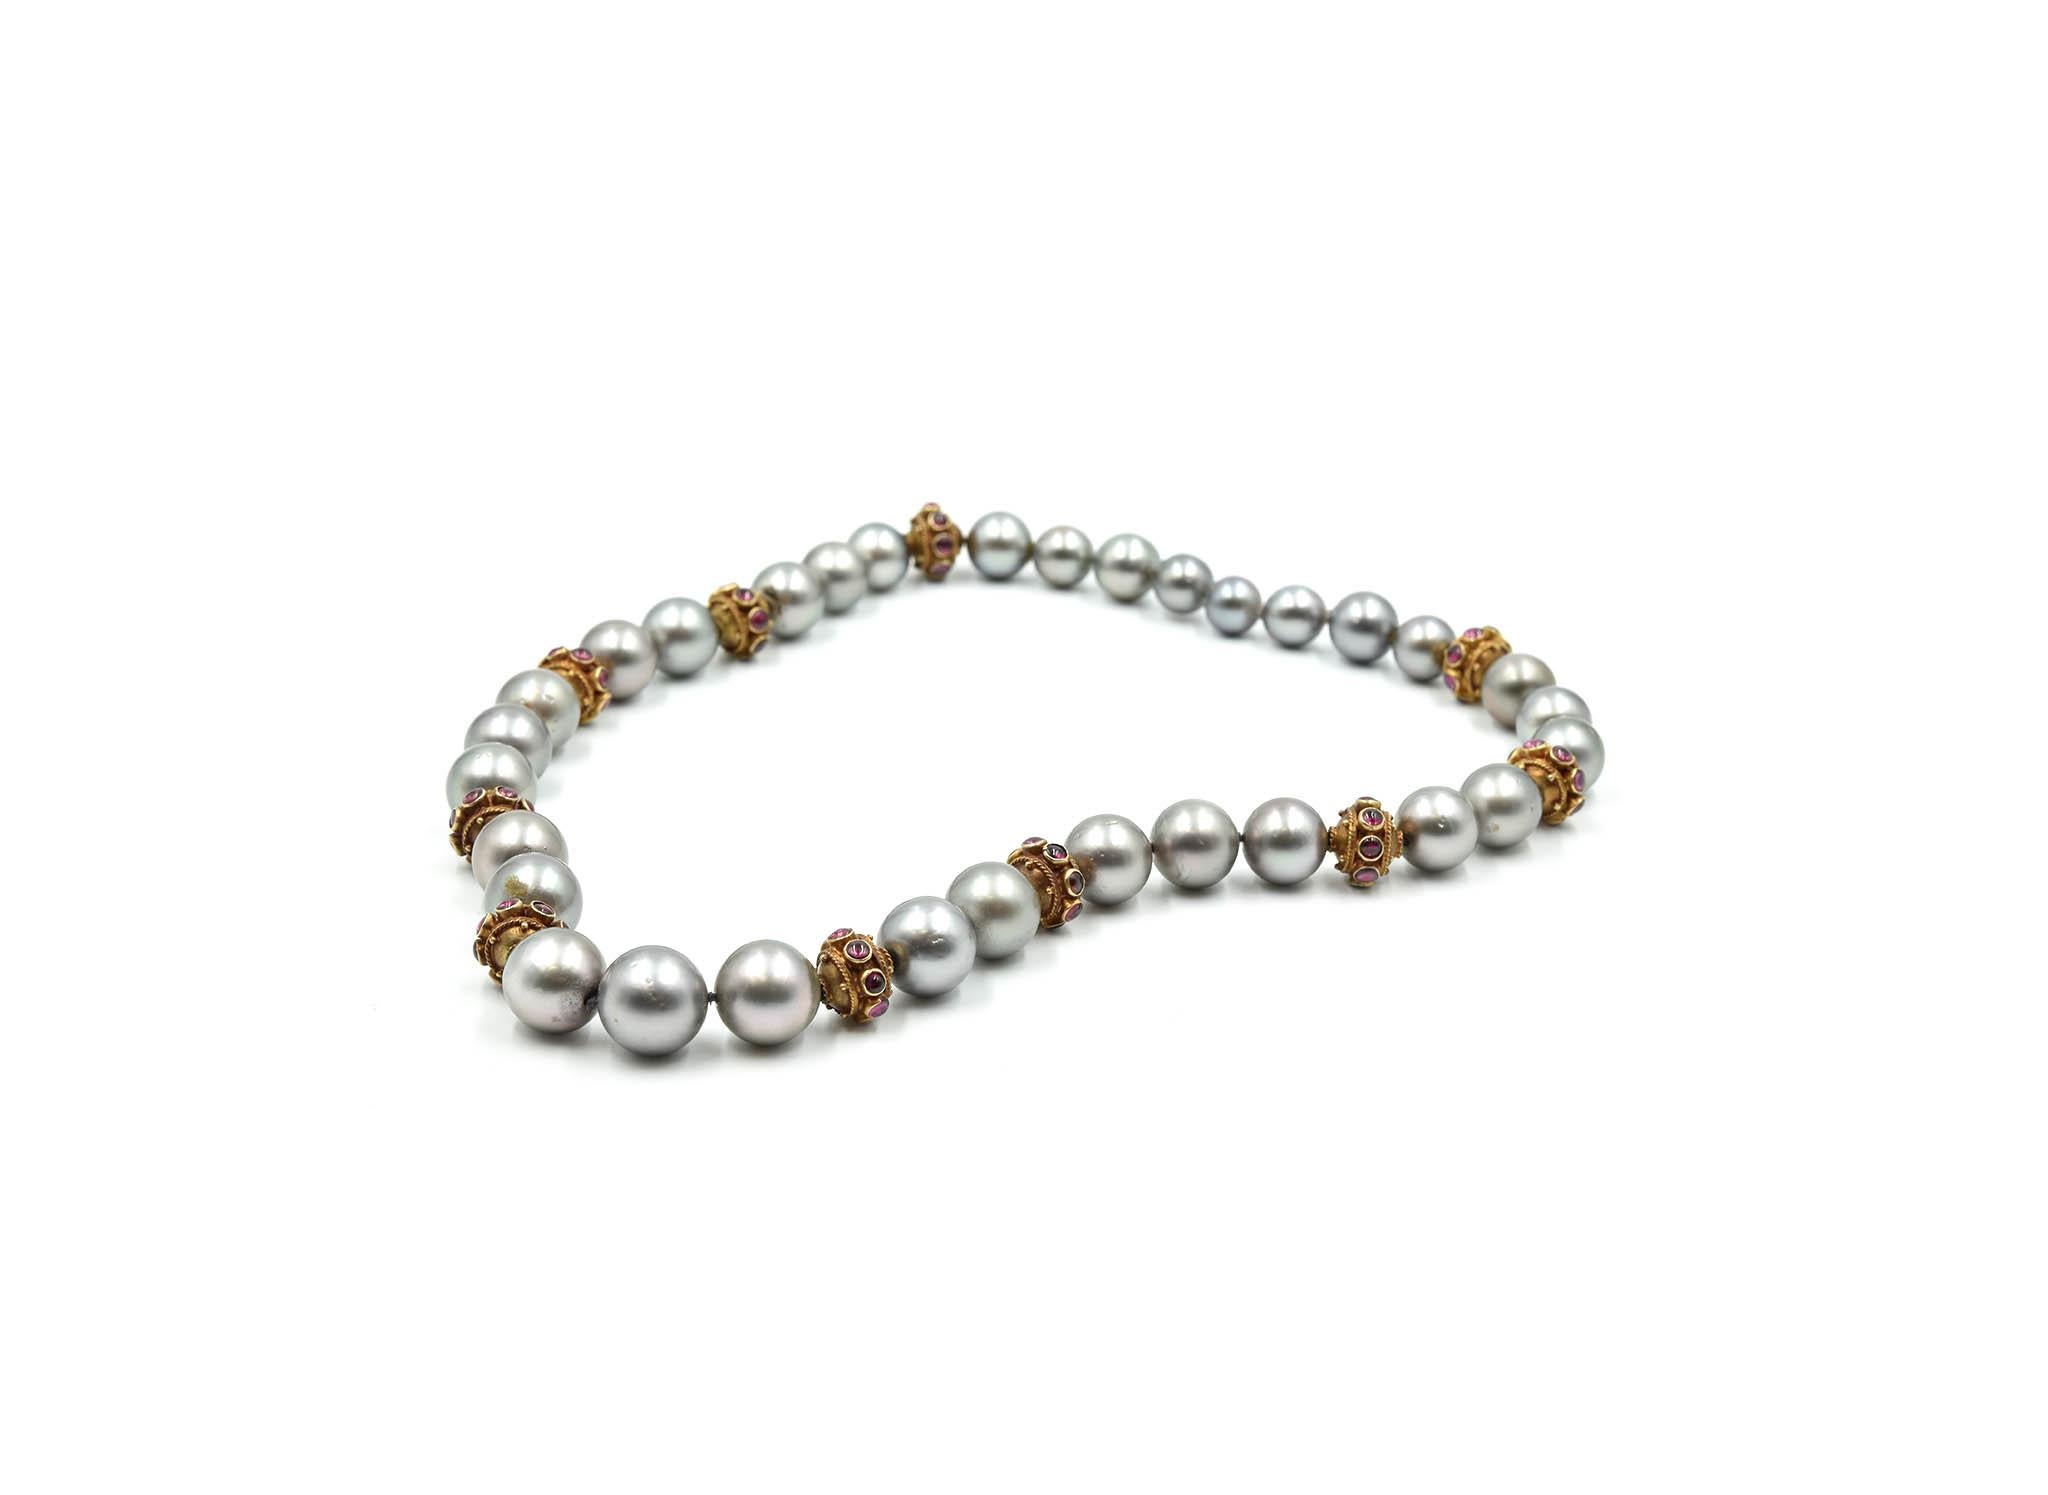 This is a great combination of black Tahitian south sea pearls with 14k yellow gold accents set with cabochon rubies! The black Tahitian south sea pearls measure between 8.09mm-11.27mm. Each south sea pearl is black with a silver glossy overtone.